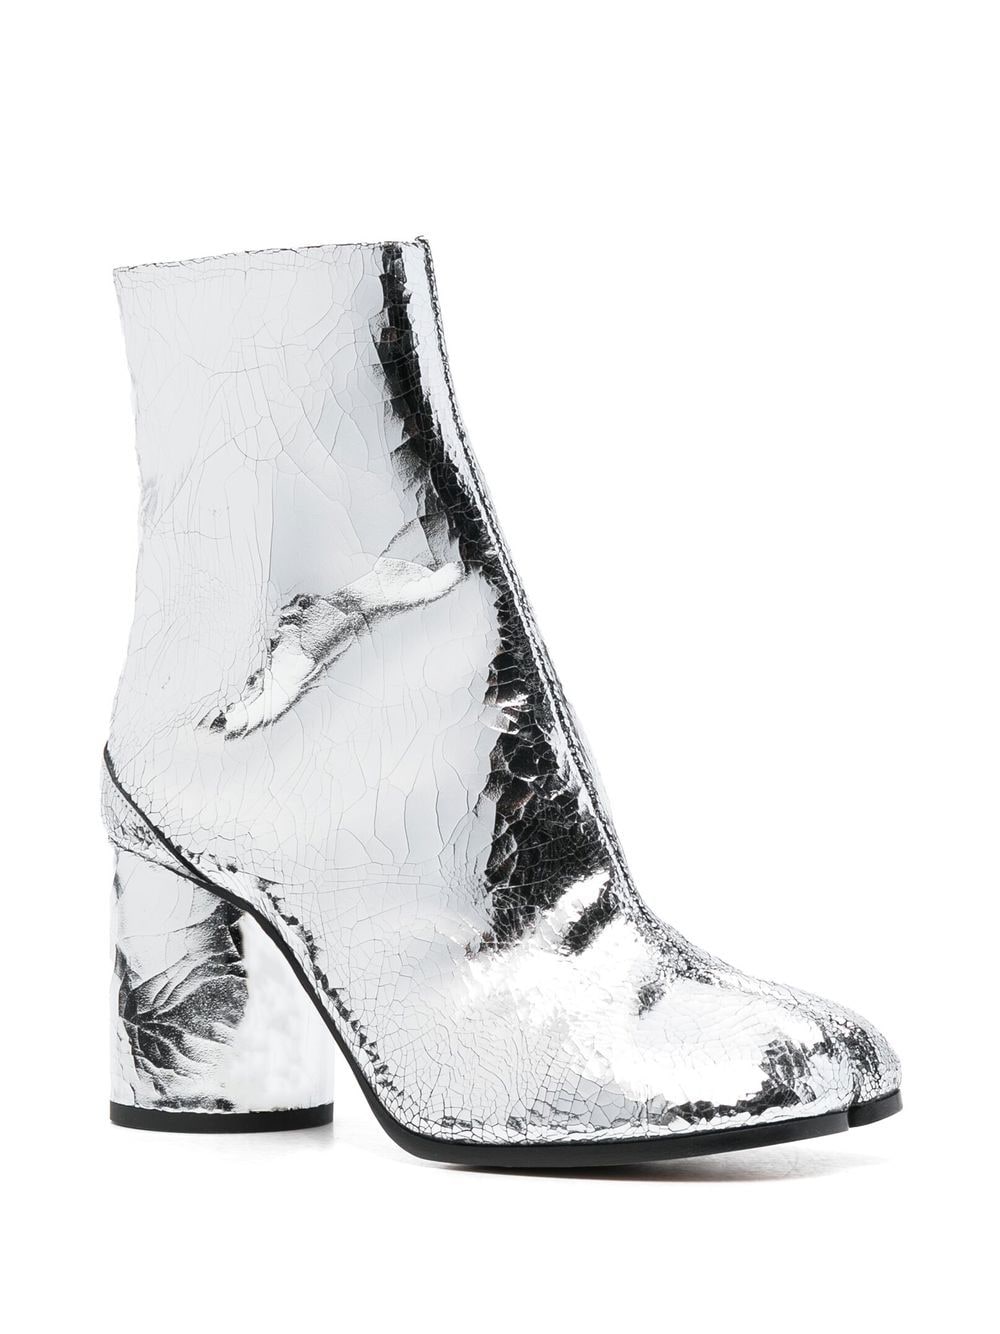 MAISON MARGIELA-SILVER LEATHER TABI ANKLE BOOT-S58WU0260P5016 T9002